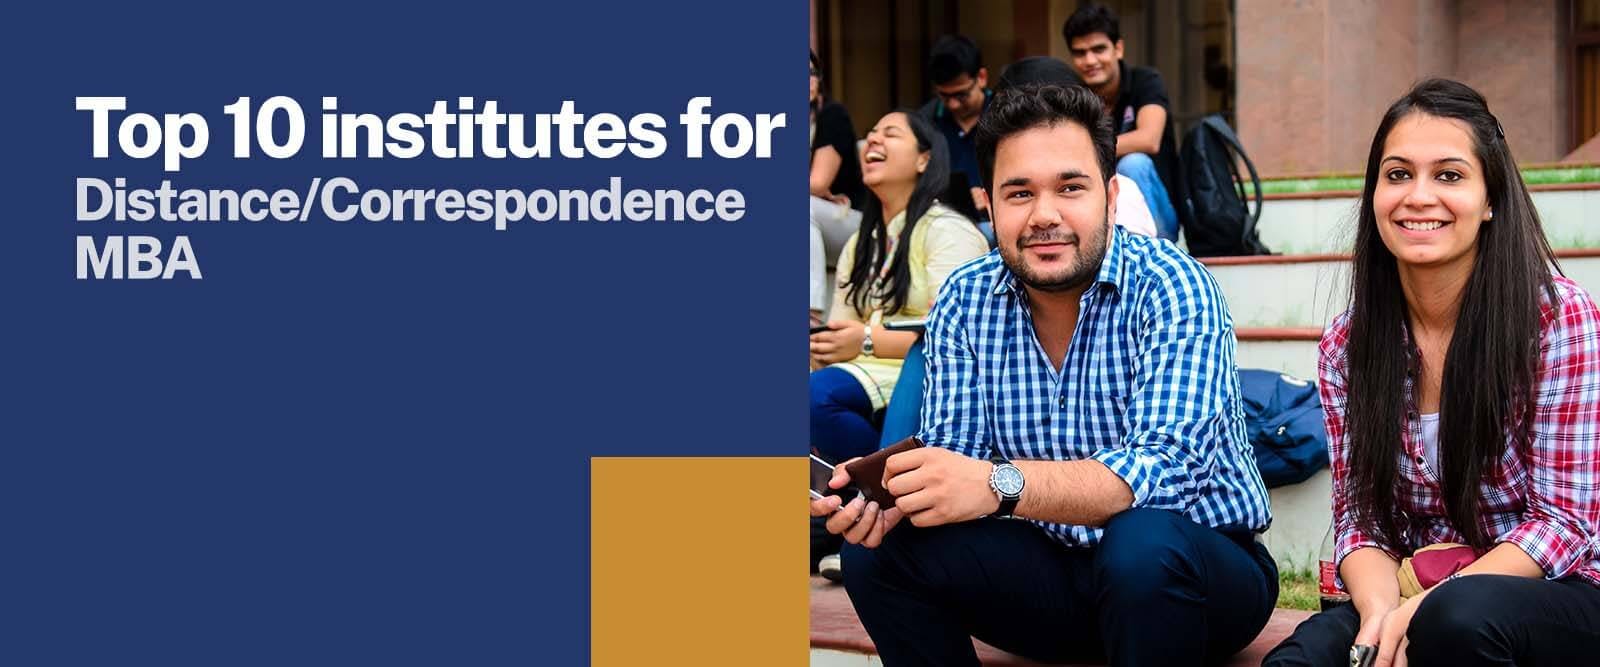 Top 10 institutes for Distance Correspondence MBA